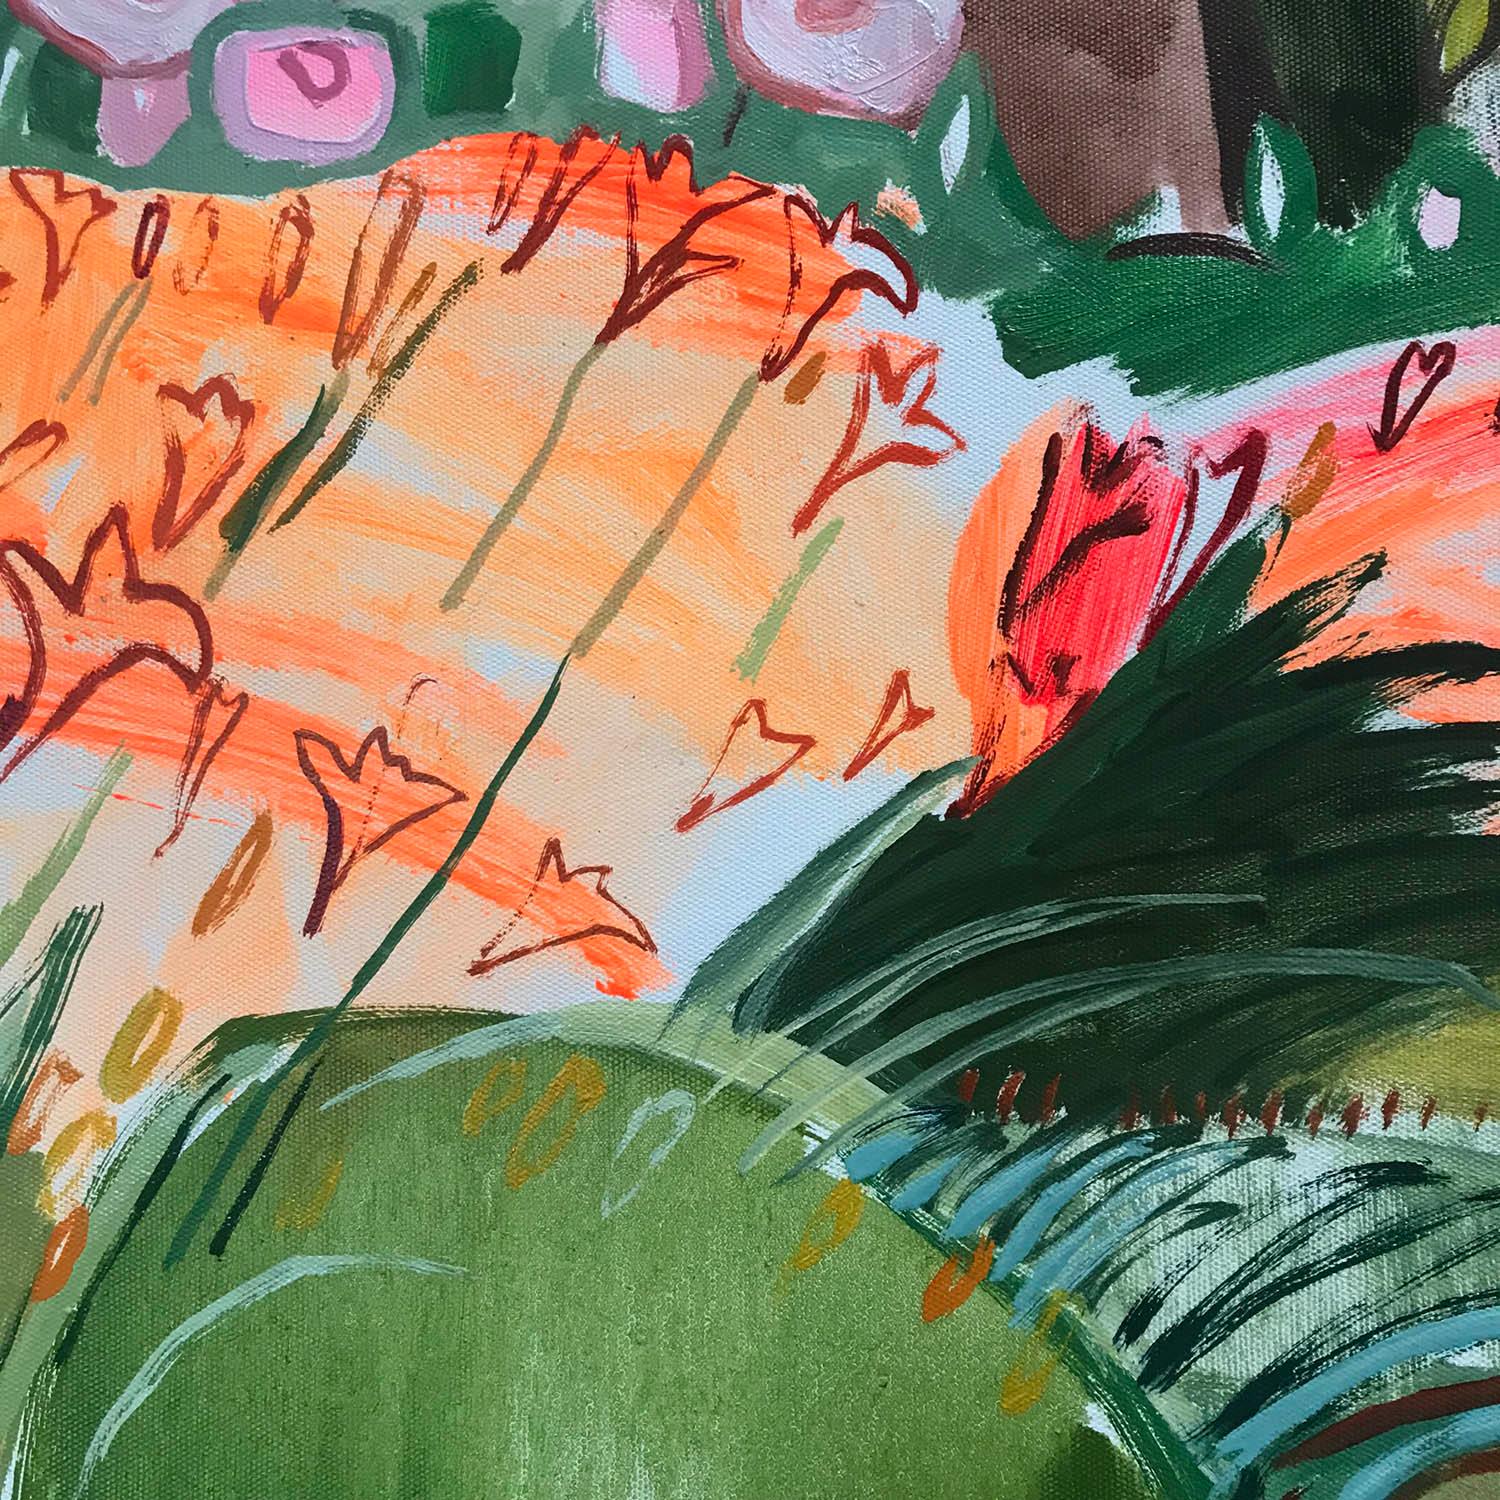 I have painted this scene several times because it is so rich and colourful and yet so restful. It’s a bank of day lilies and dog roses in the garden of a cottage belonging to a good friend. I love the drifts of bright oranges and pinks – so showy